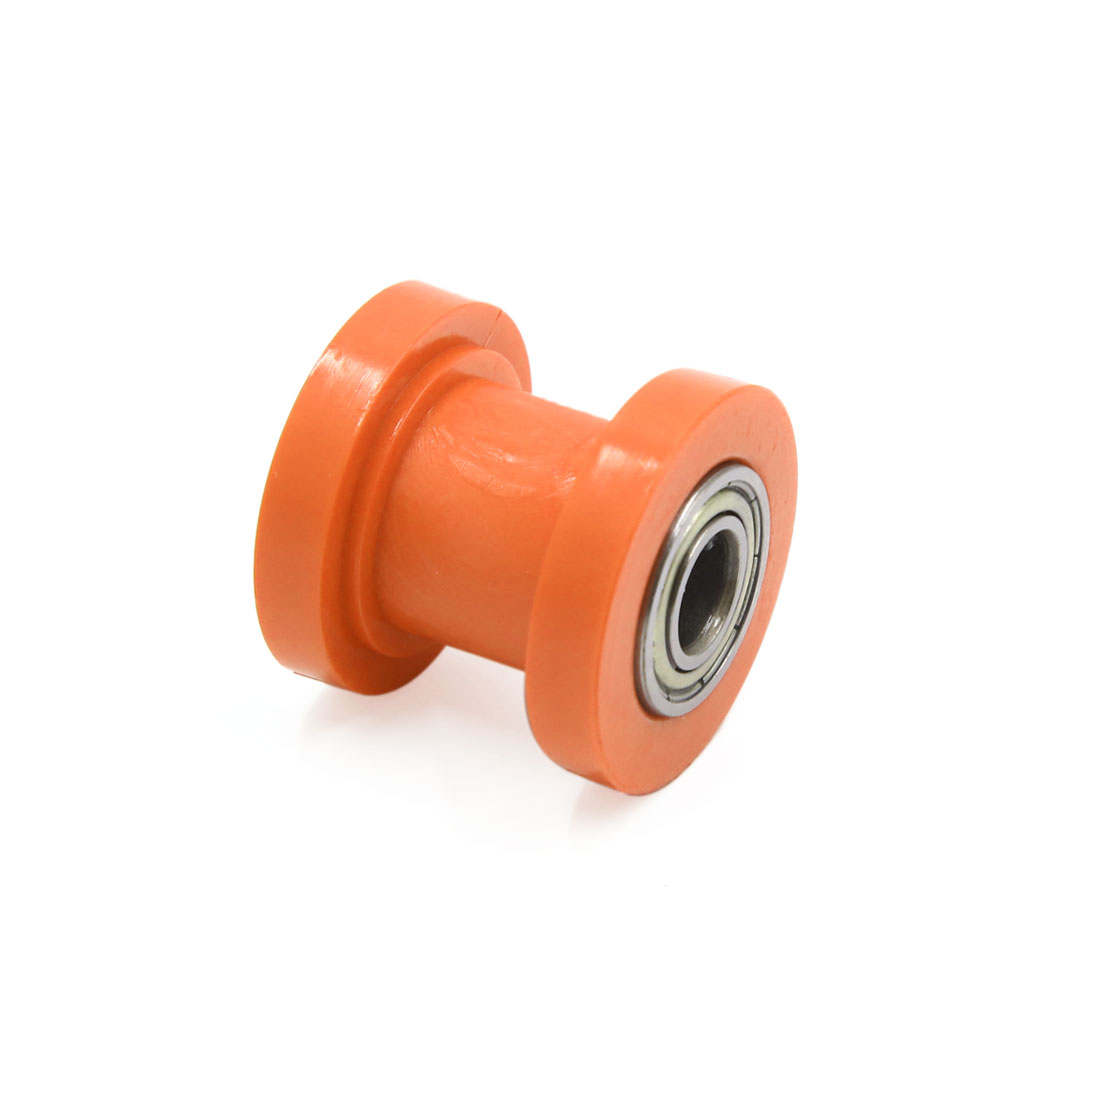 Unique Bargains 10mm Hole Chain Roller Pulley Slider Tensioner Wheel Guide Orange for Motorcycle